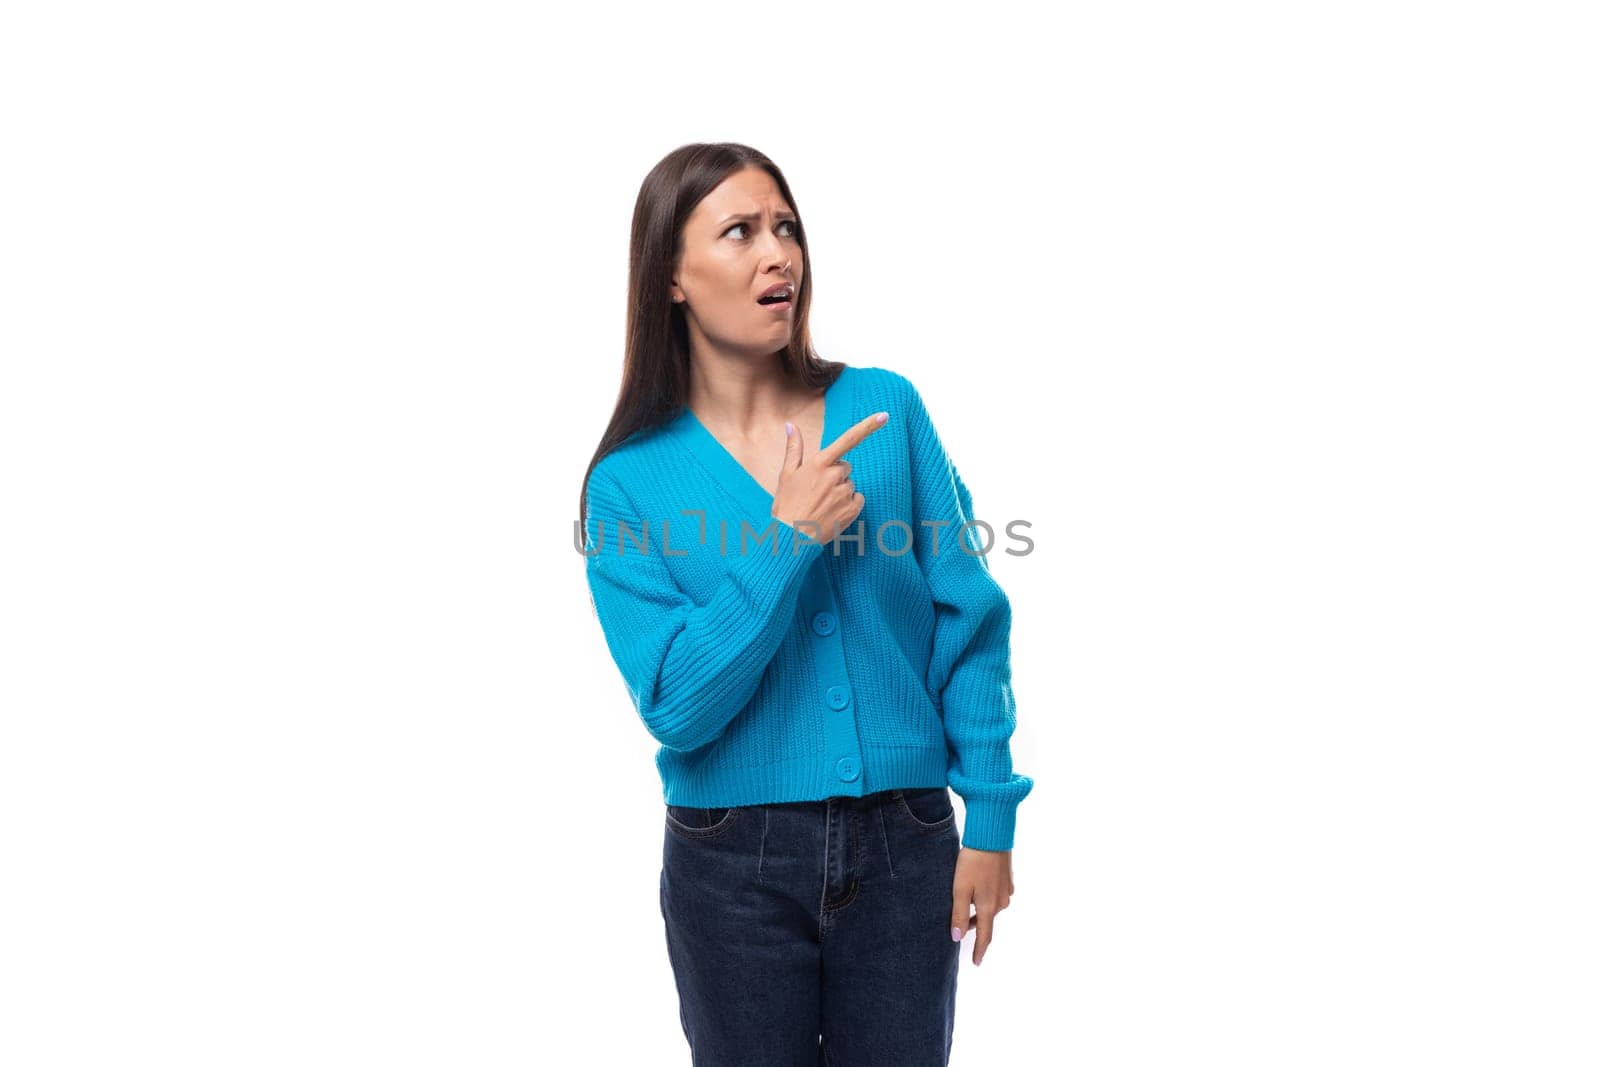 young pleasantly surprised pretty european brunette woman dressed in a blue button-down sweater rejoices on a white background with copy space by TRMK